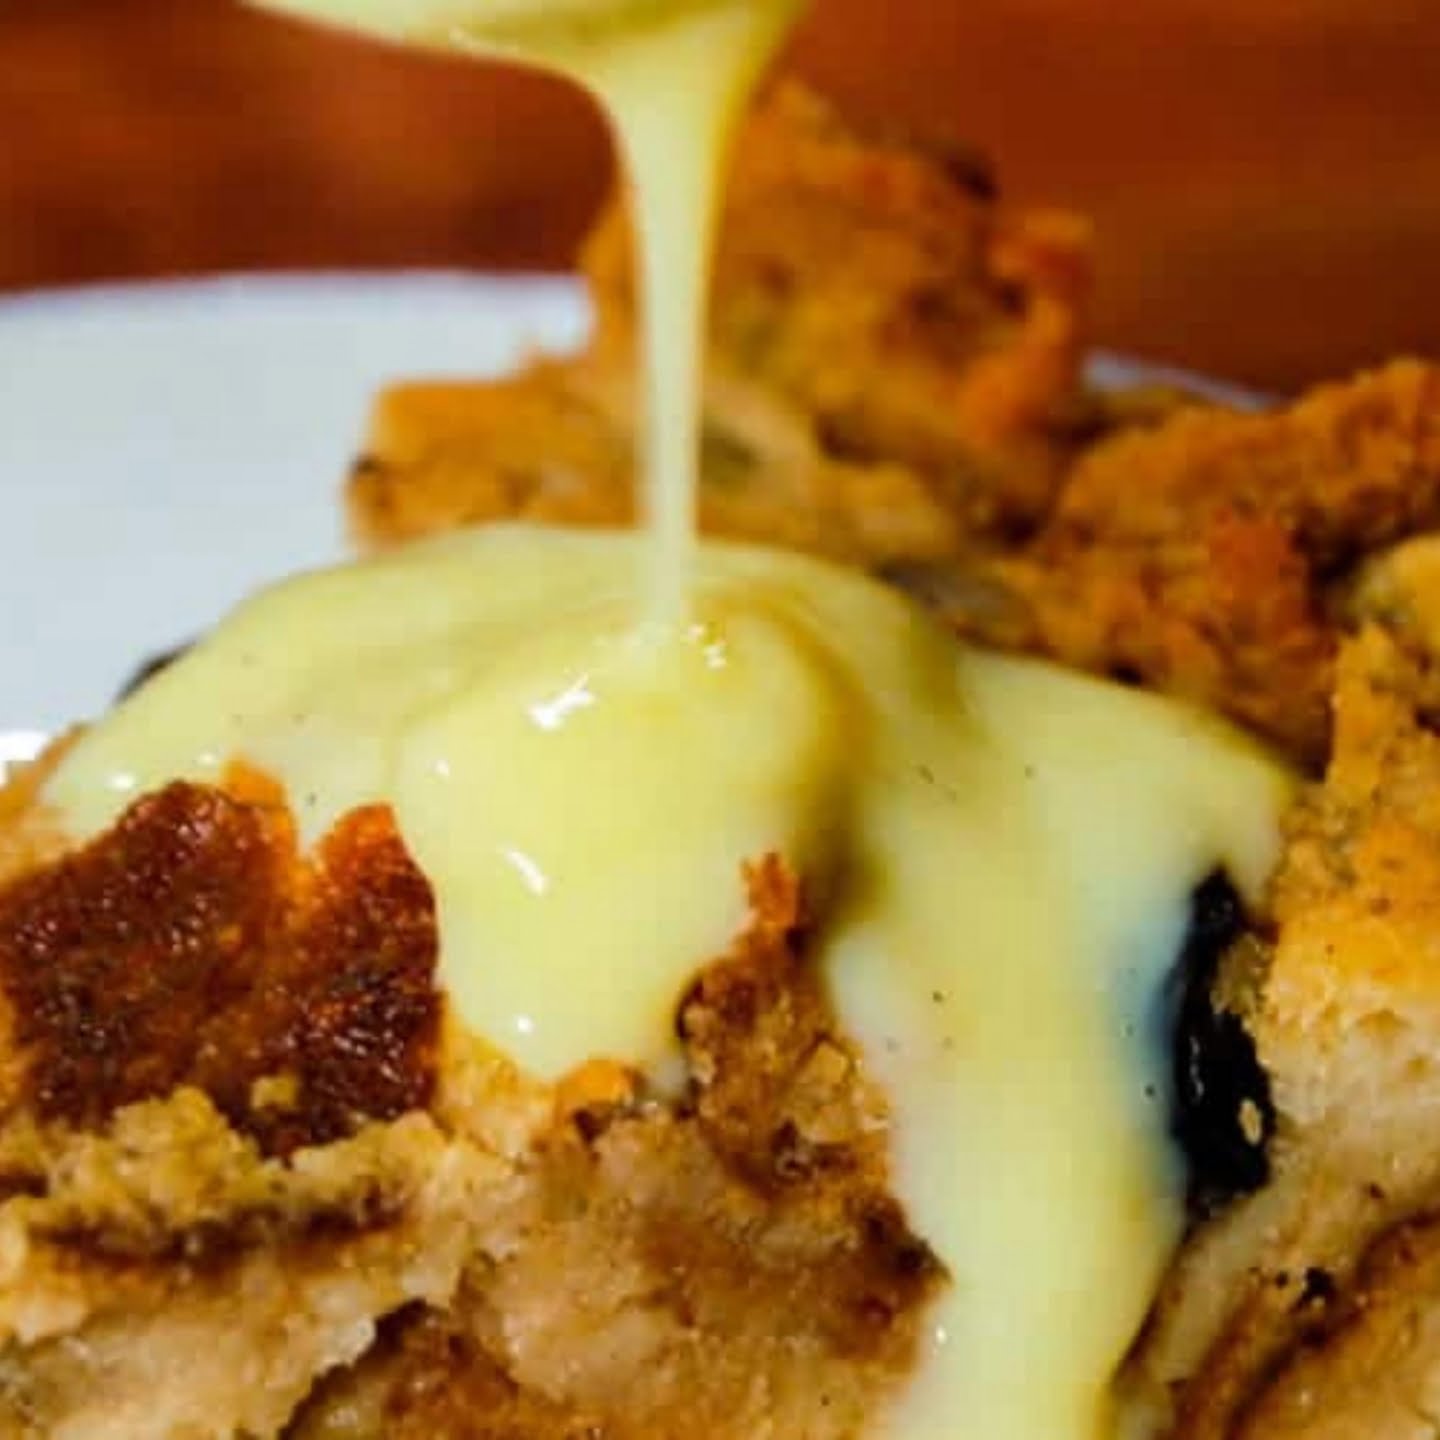 Bread pudding with creme anglaise